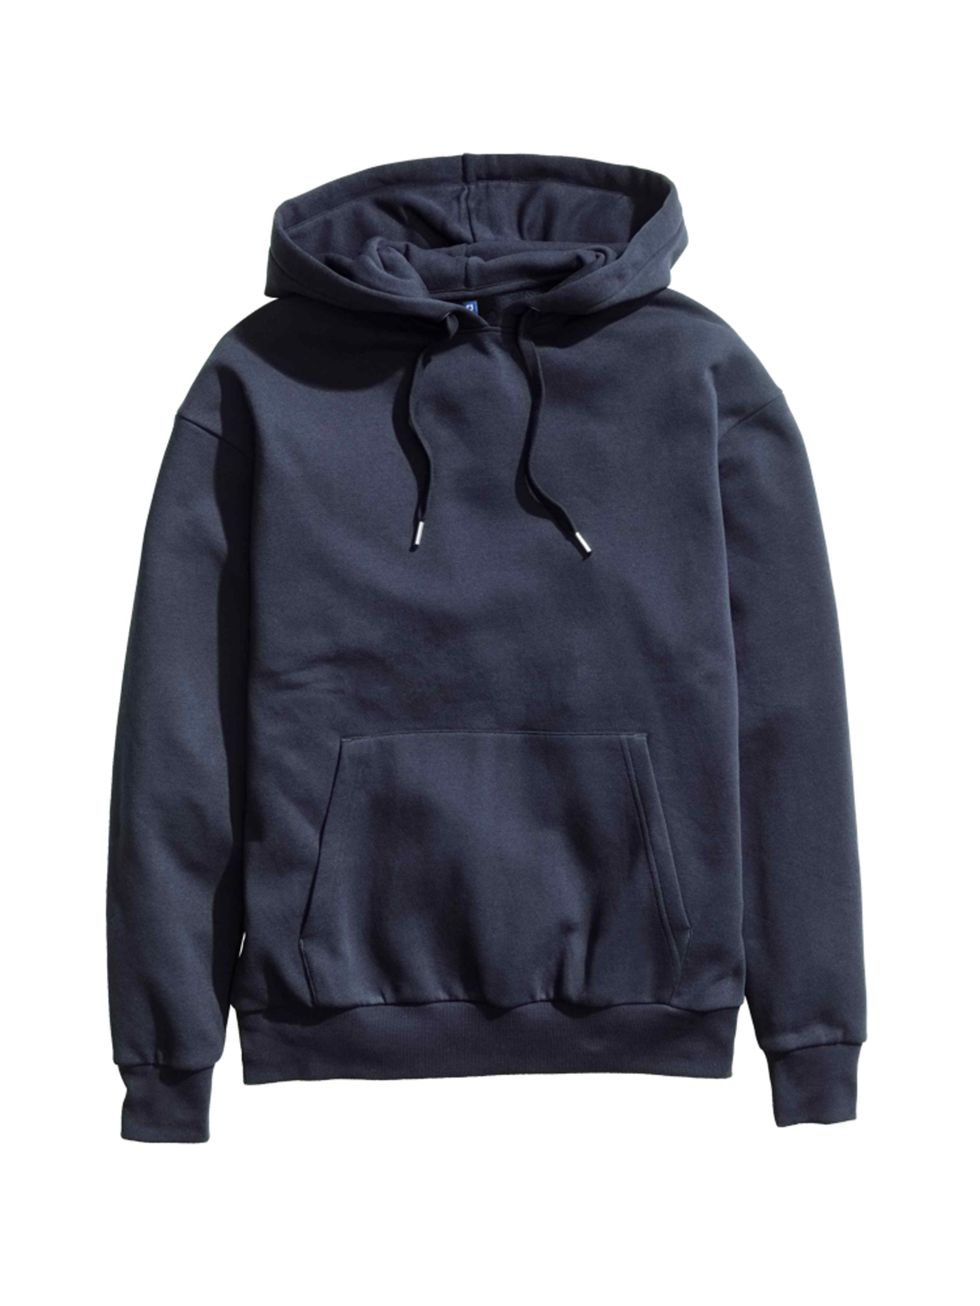 <p>Oversized hooded top, £19.99, <a href="http://www2.hm.com/en_gb/productpage.0316924002.html" target="_blank">H&M</a></p>